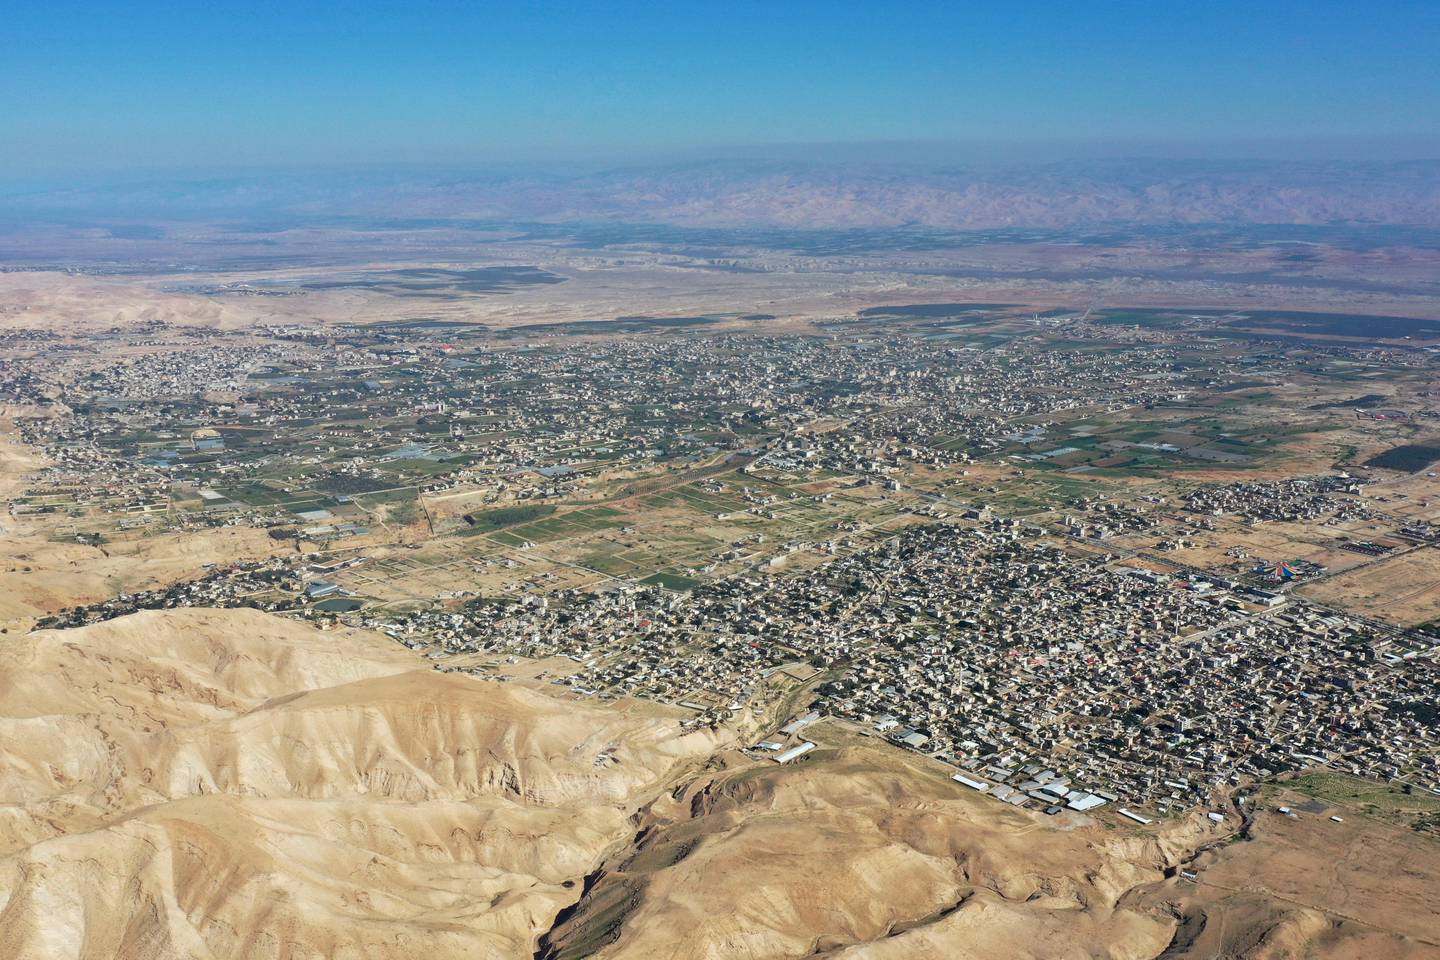 A general view of the West Bank city of Jericho, Sunday, Jan. 26, 2020. Israeli Prime Minister Benjamin Netanyahu has been flirting with plans to annex the Jordan Valley as well as Jewish settlements across the West Bank, a move popular with his nationalist base but one long warned could set off renewed Palestinian violence and all but extinguish any hope of creating a viable Palestinian state. (AP Photo/Oded Balilty)